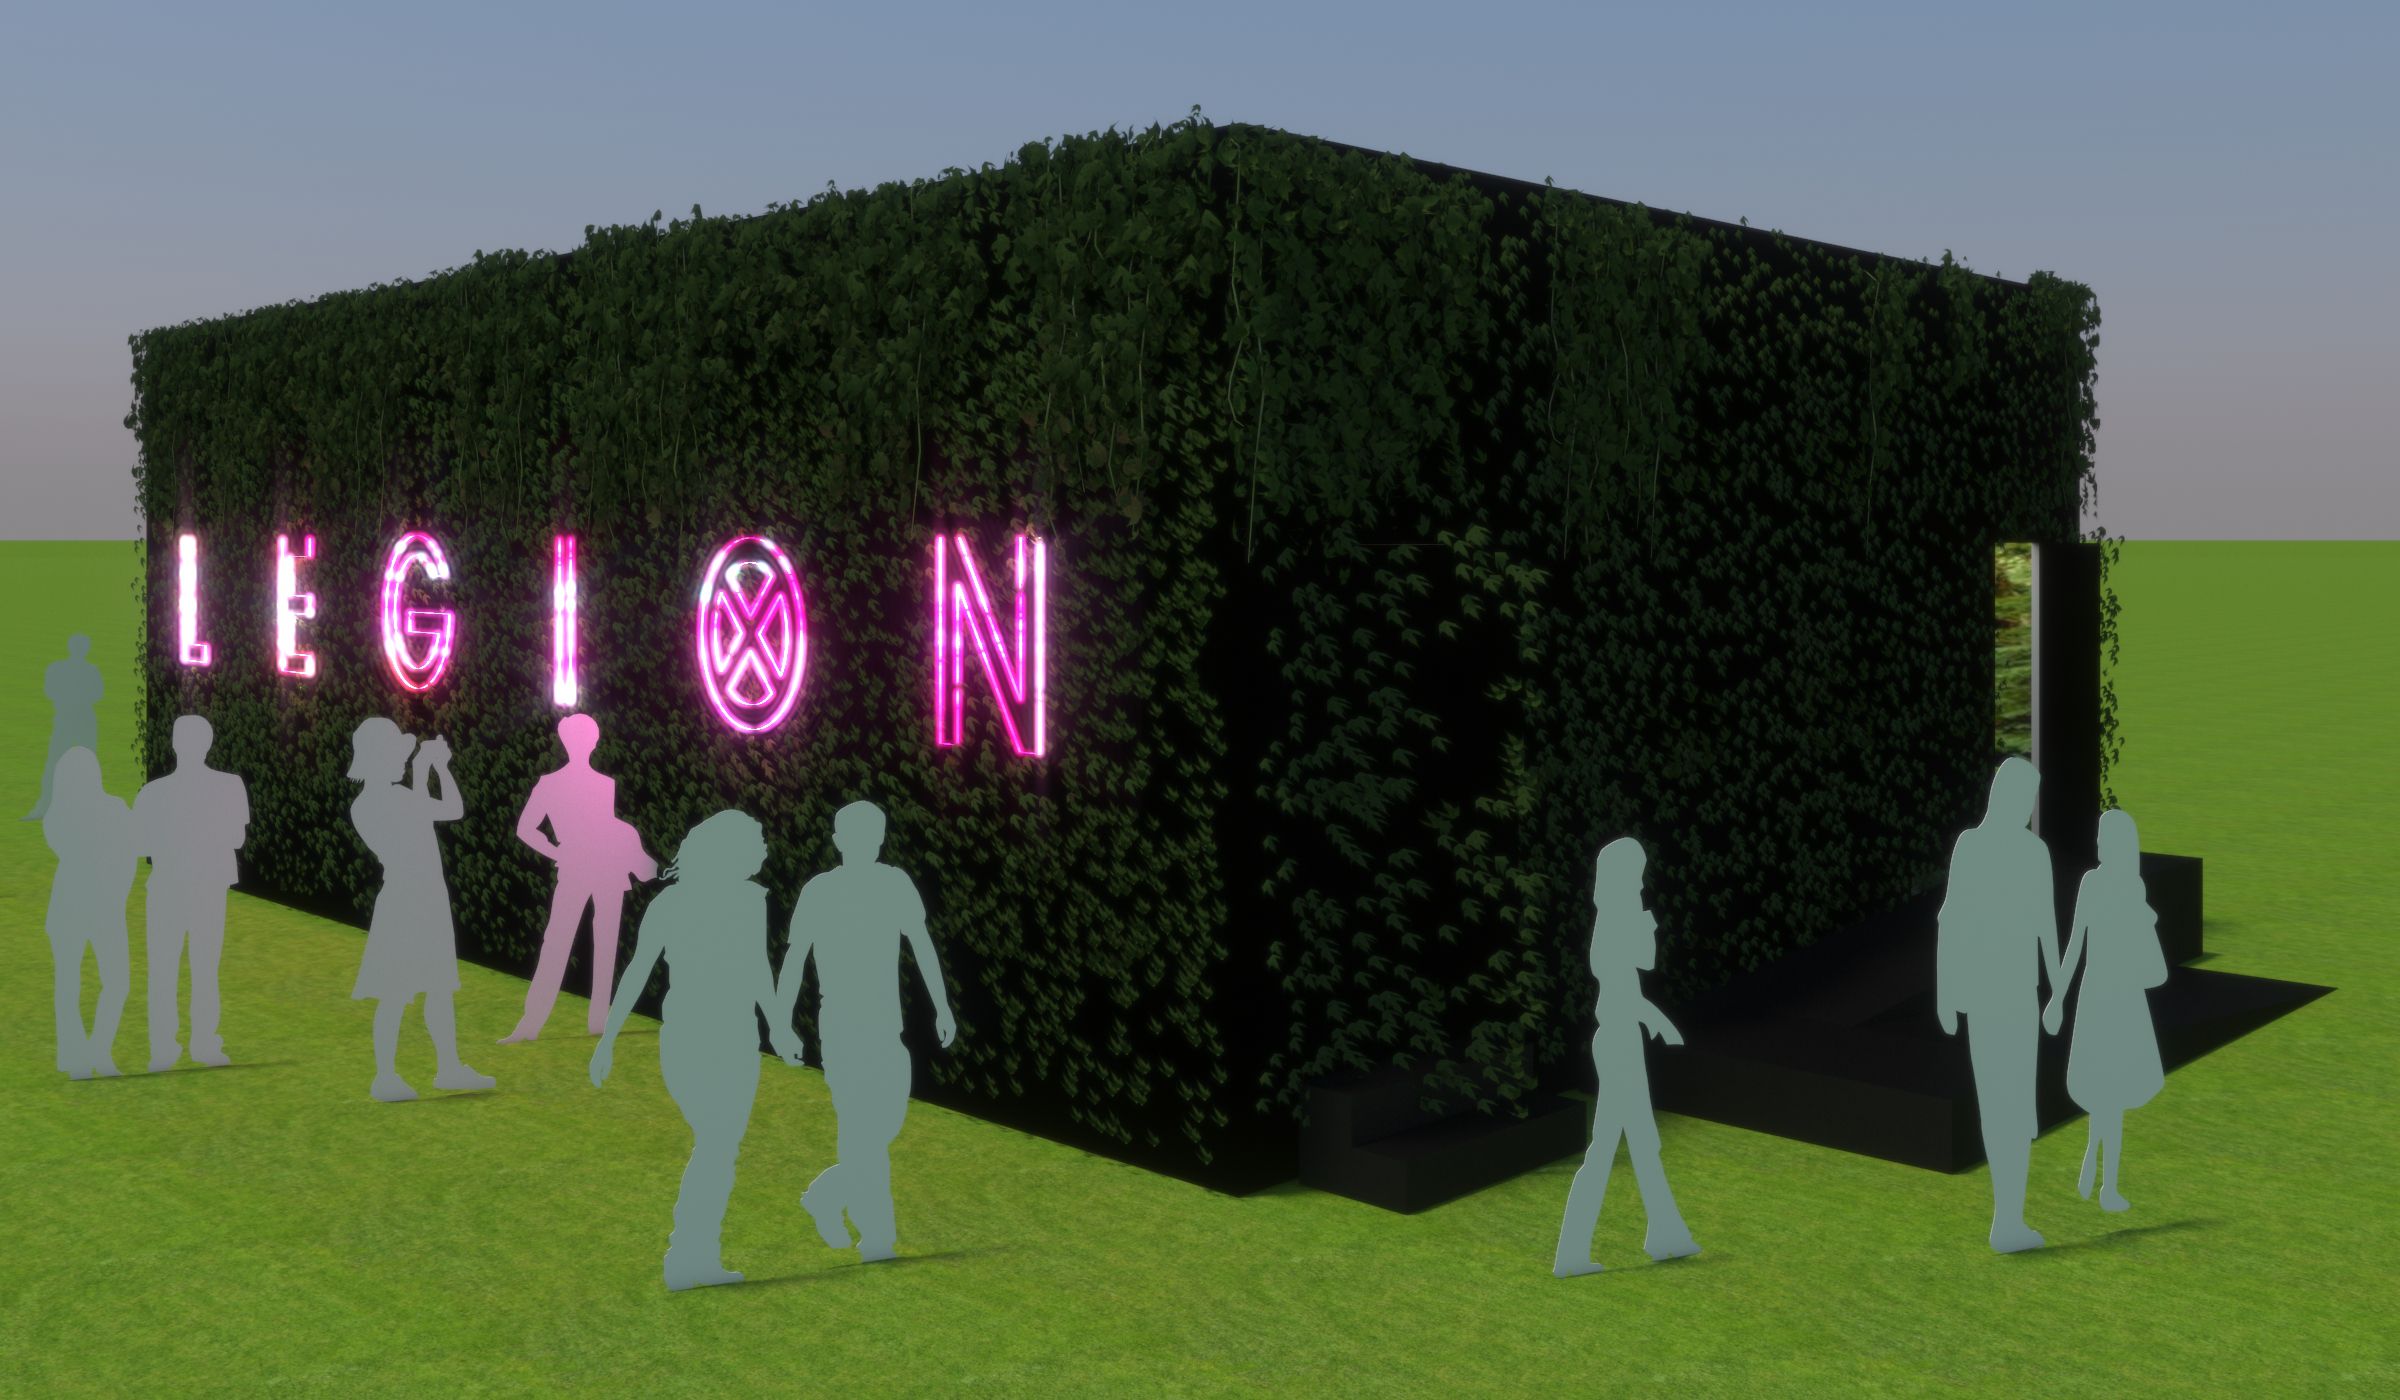 Concept of the installation’s exterior.